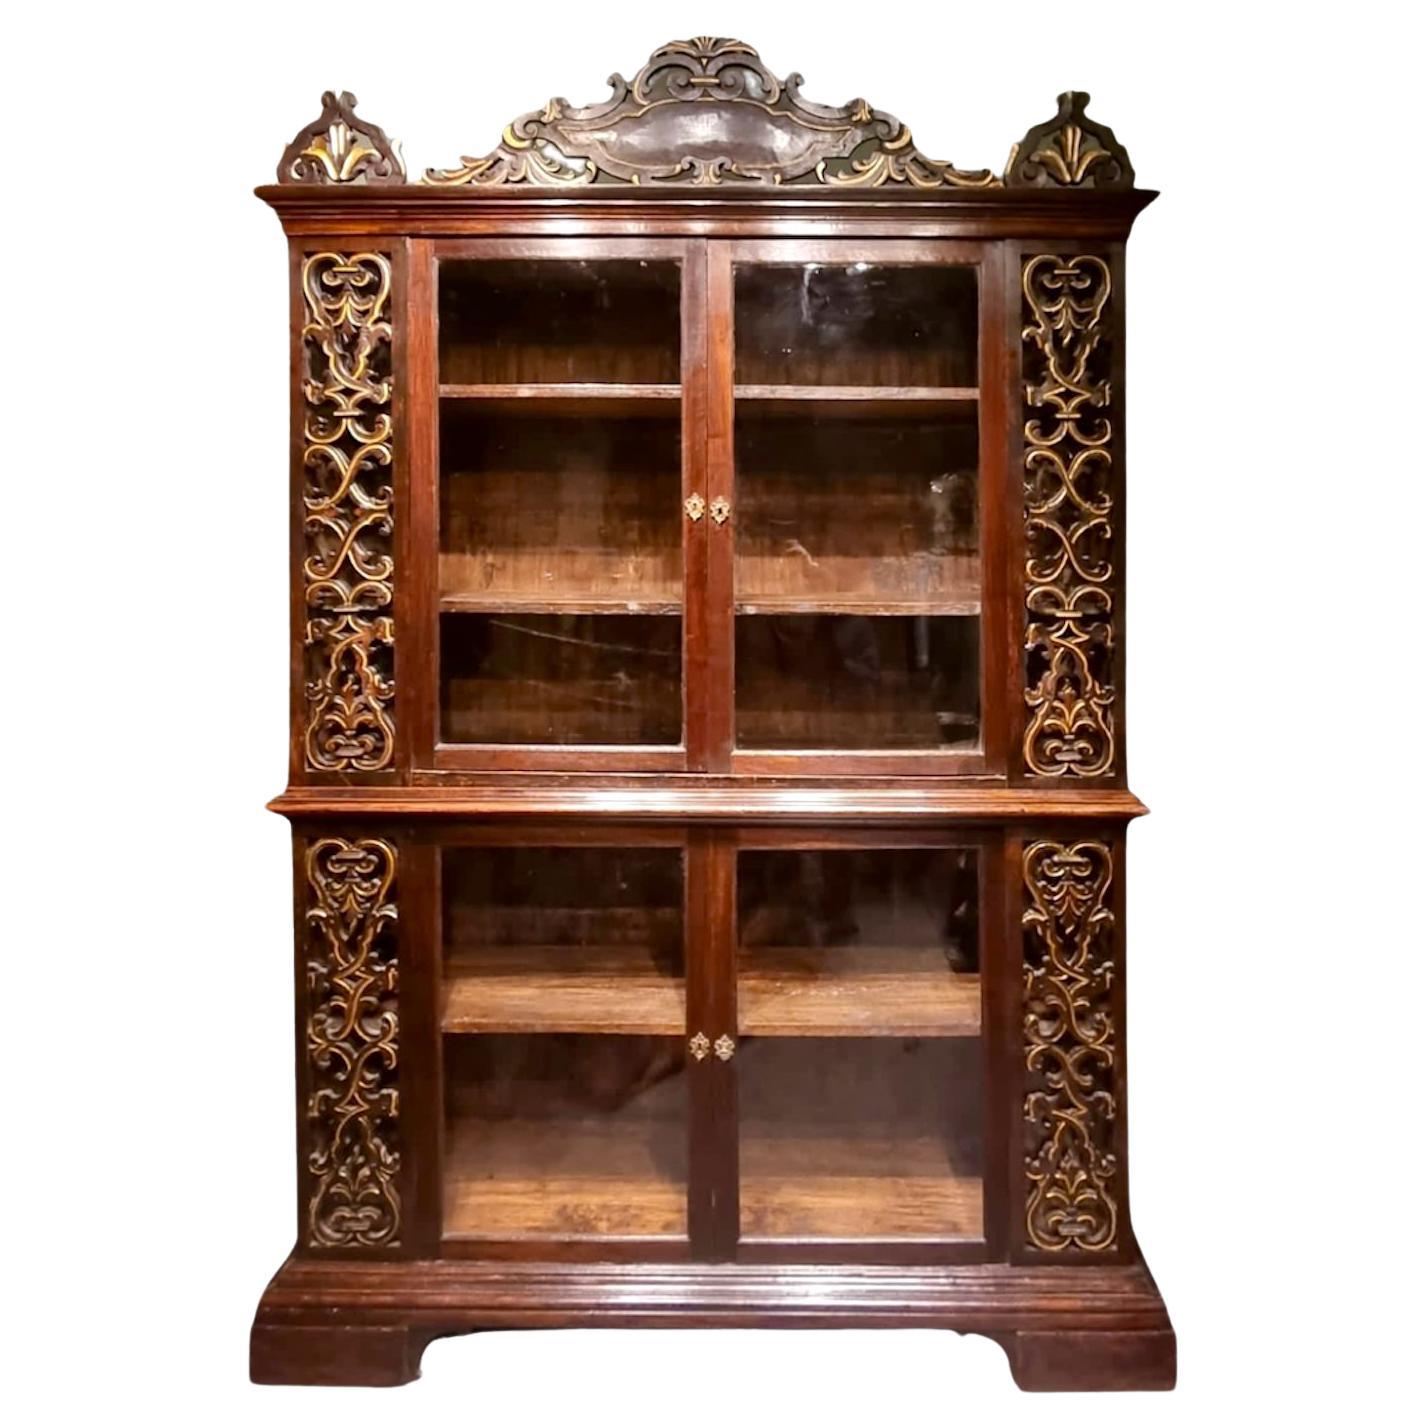 Bookcase dating back to the late 18th century For Sale